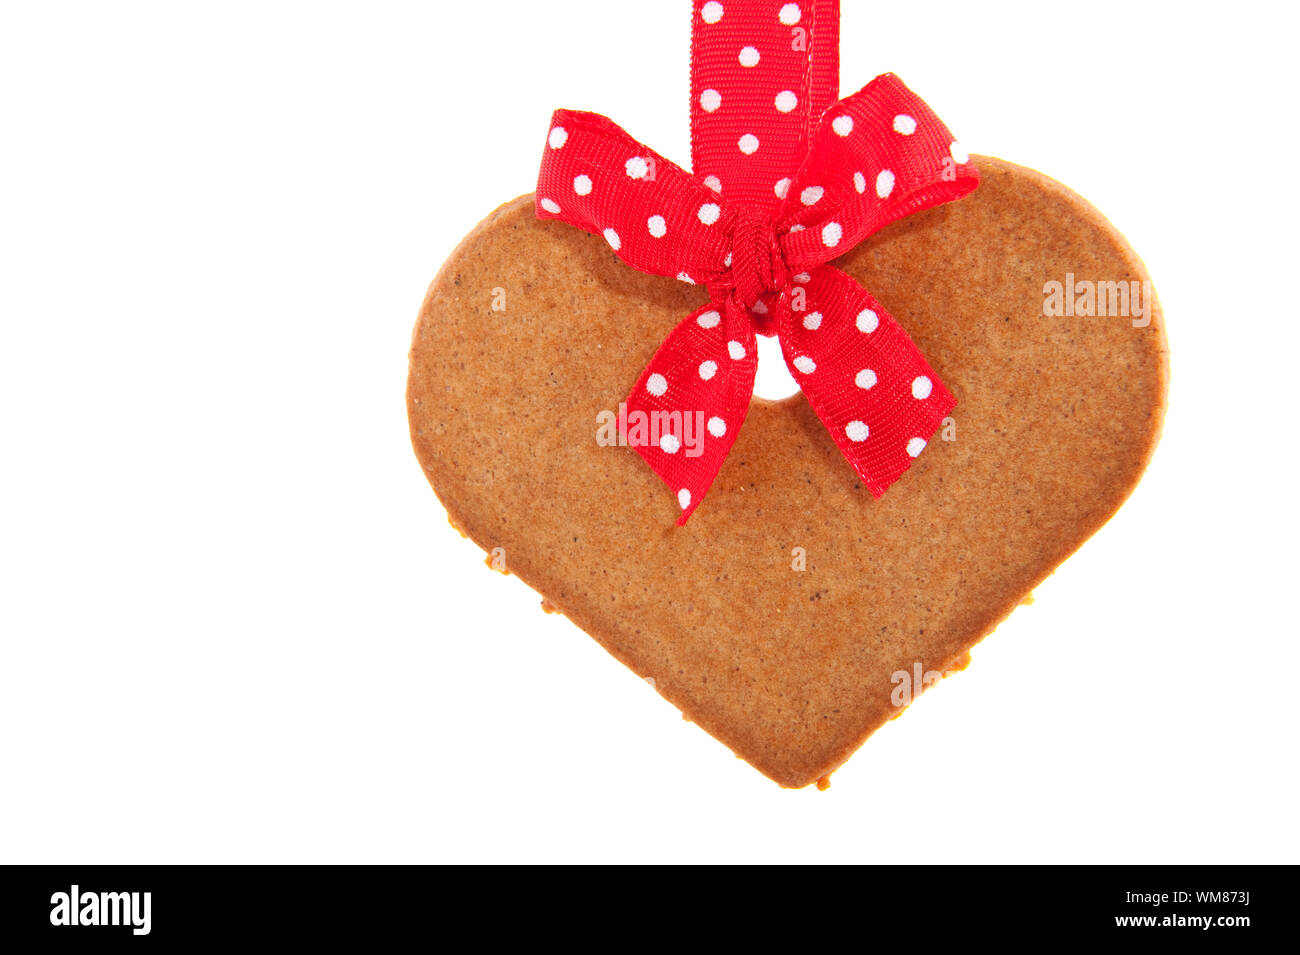 Baked gingerbread heart coookie with red speckles bows and ribbon Stock Photo